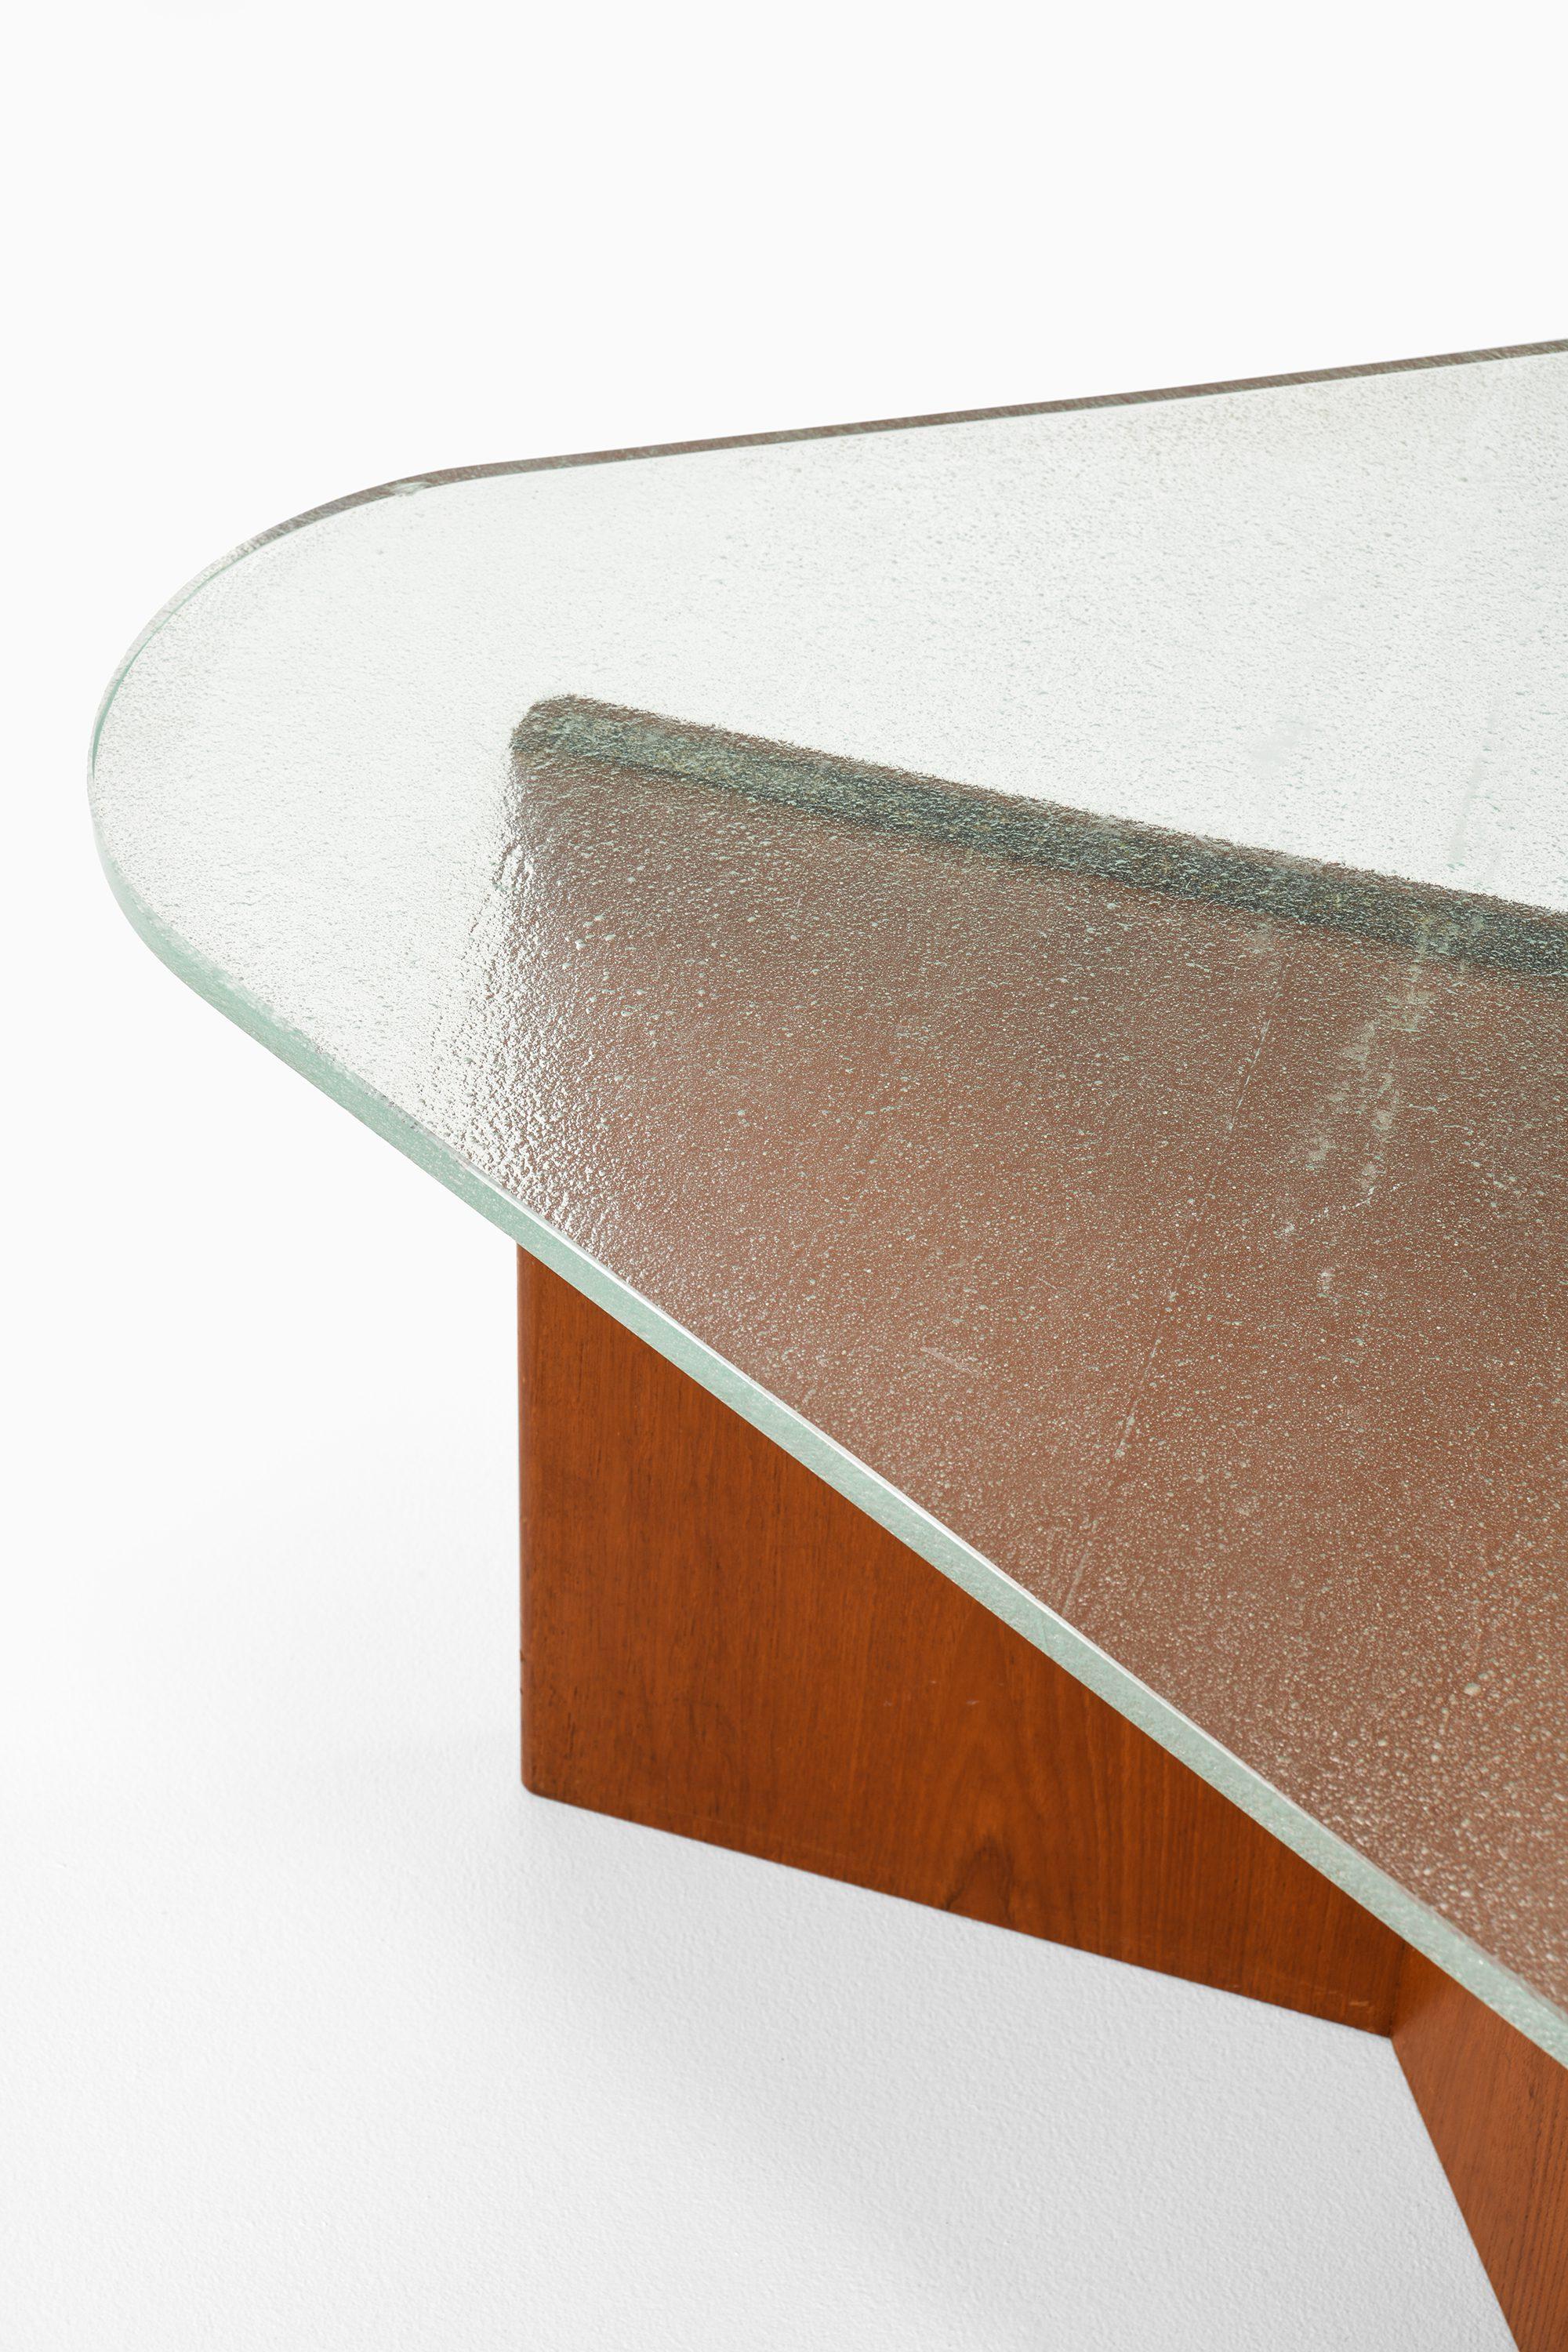 Swedish Triangular Coffee Table in Elm and Raw Glass Top by Axel Einar Hjorth, 1940's For Sale